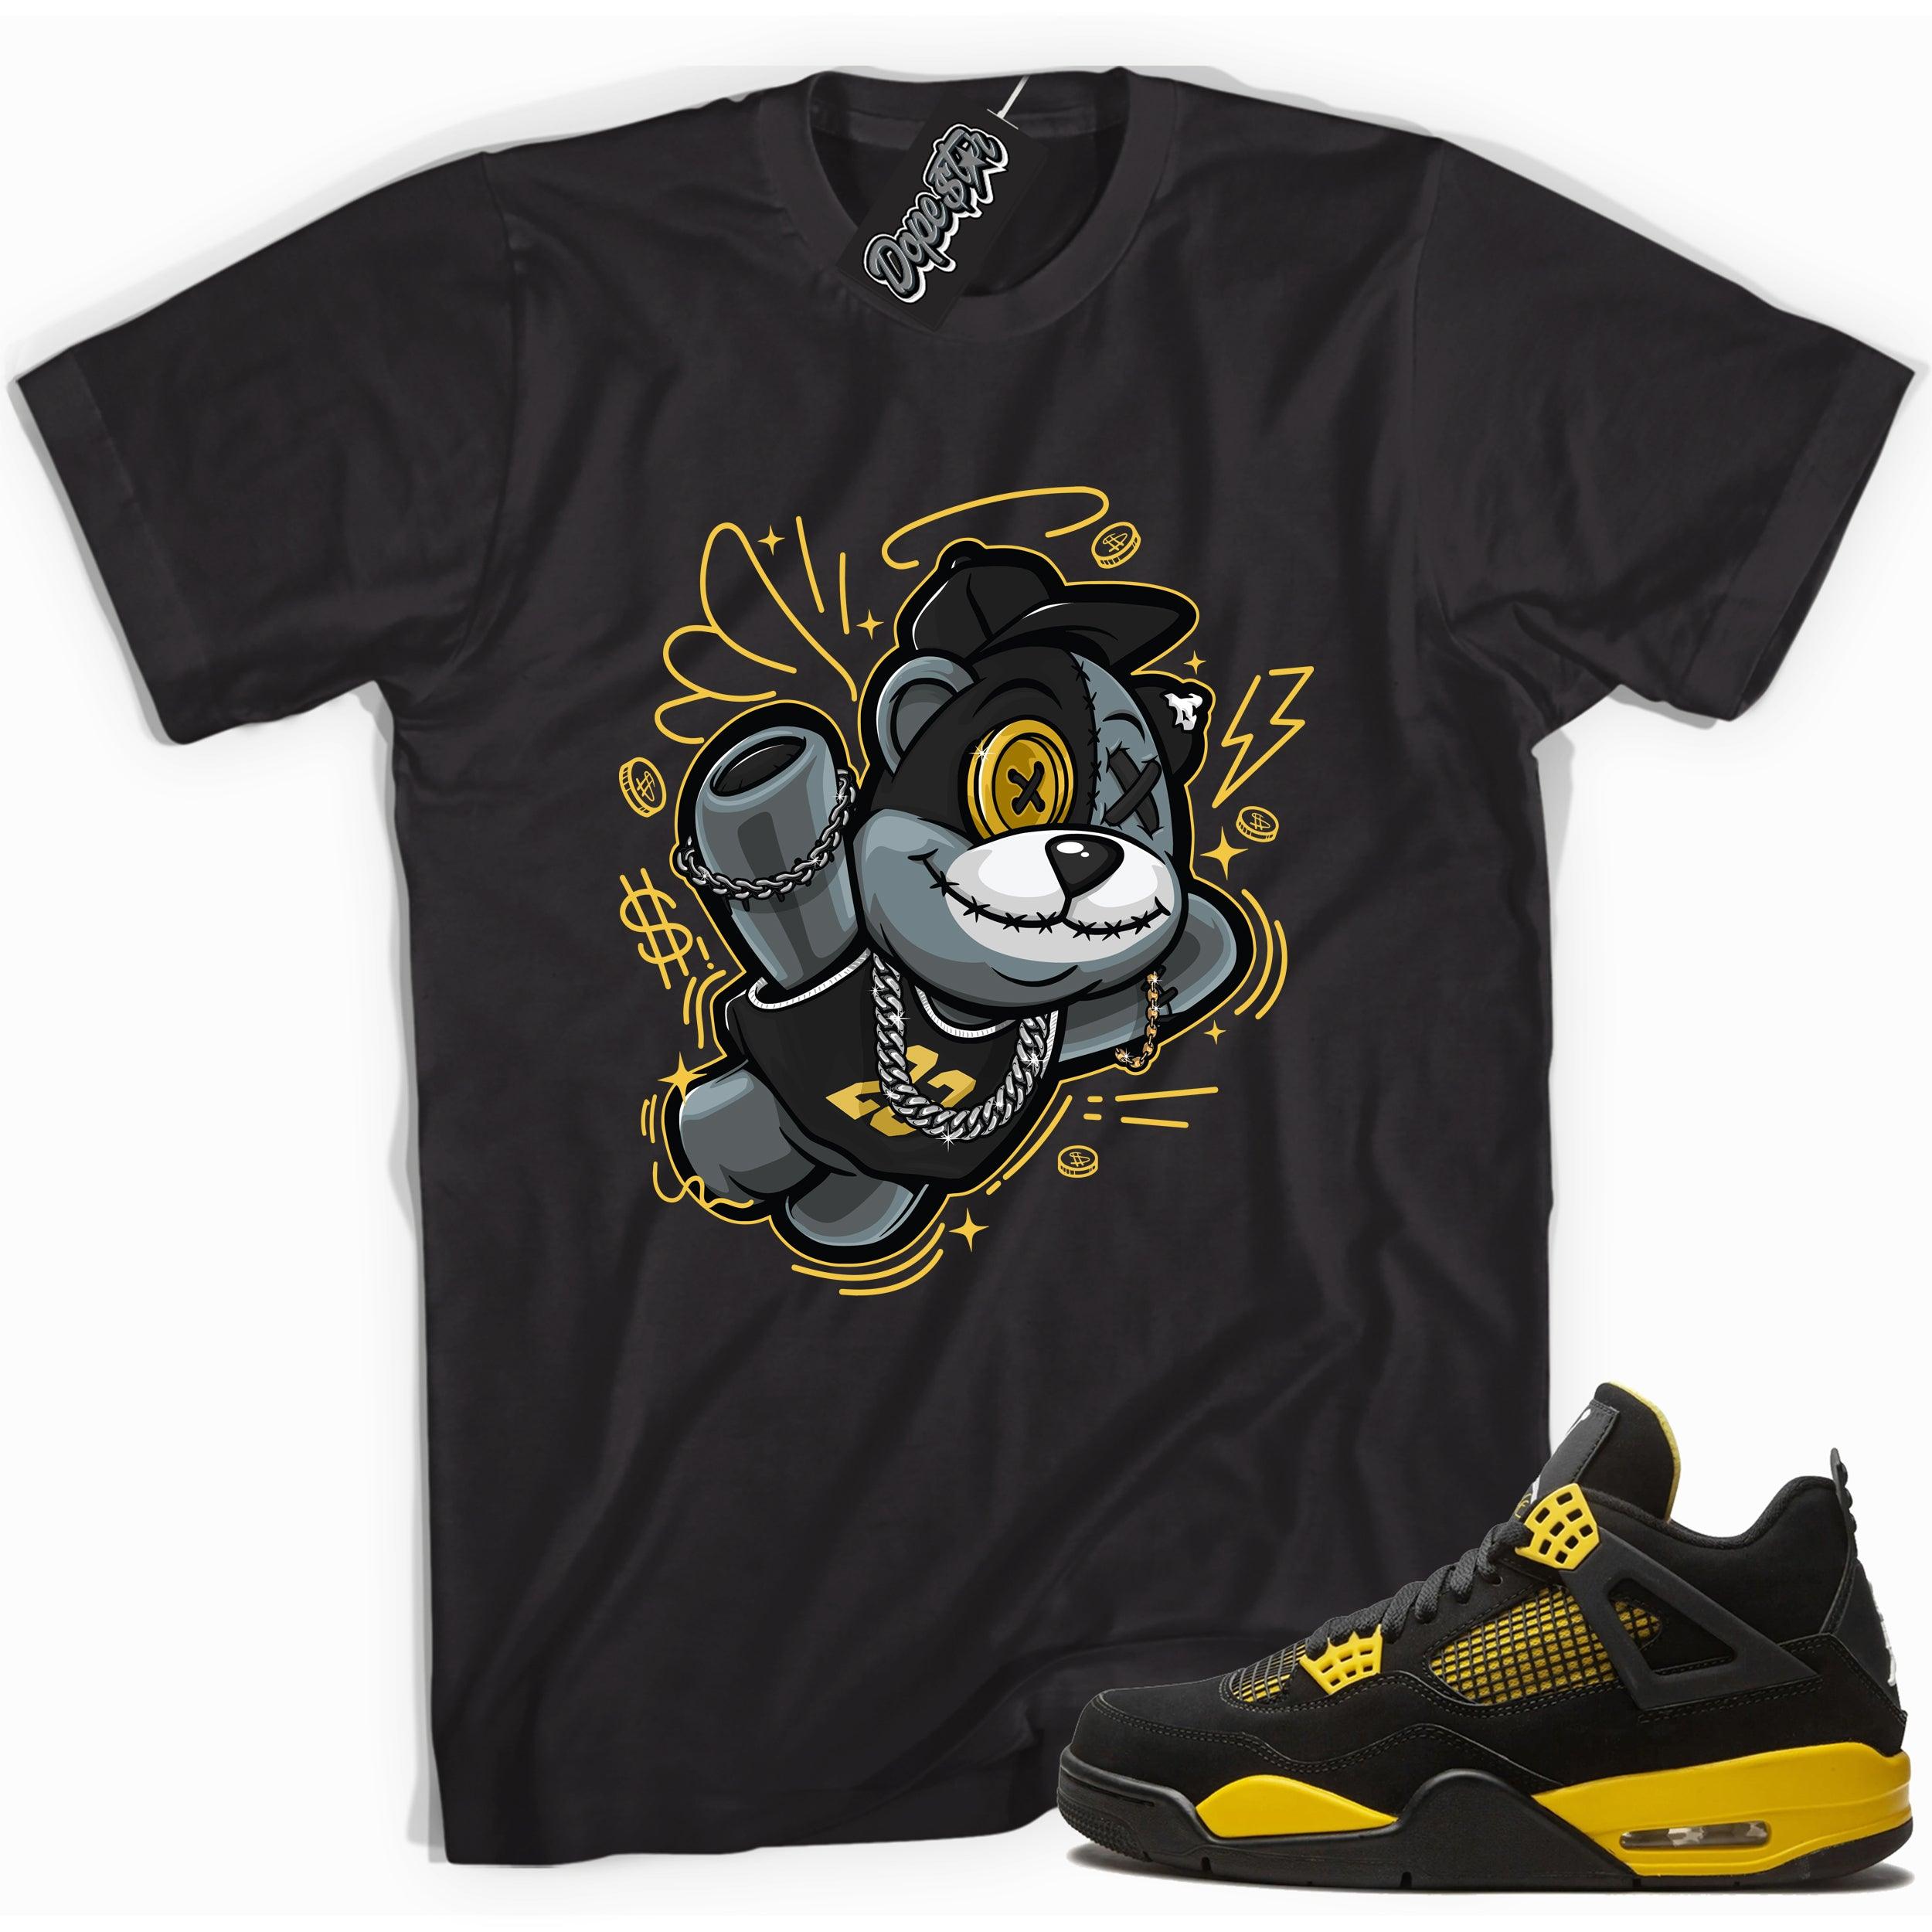 Cool black graphic tee with 'slam dunk bear' print, that perfectly matches  Air Jordan 4 Thunder sneakers